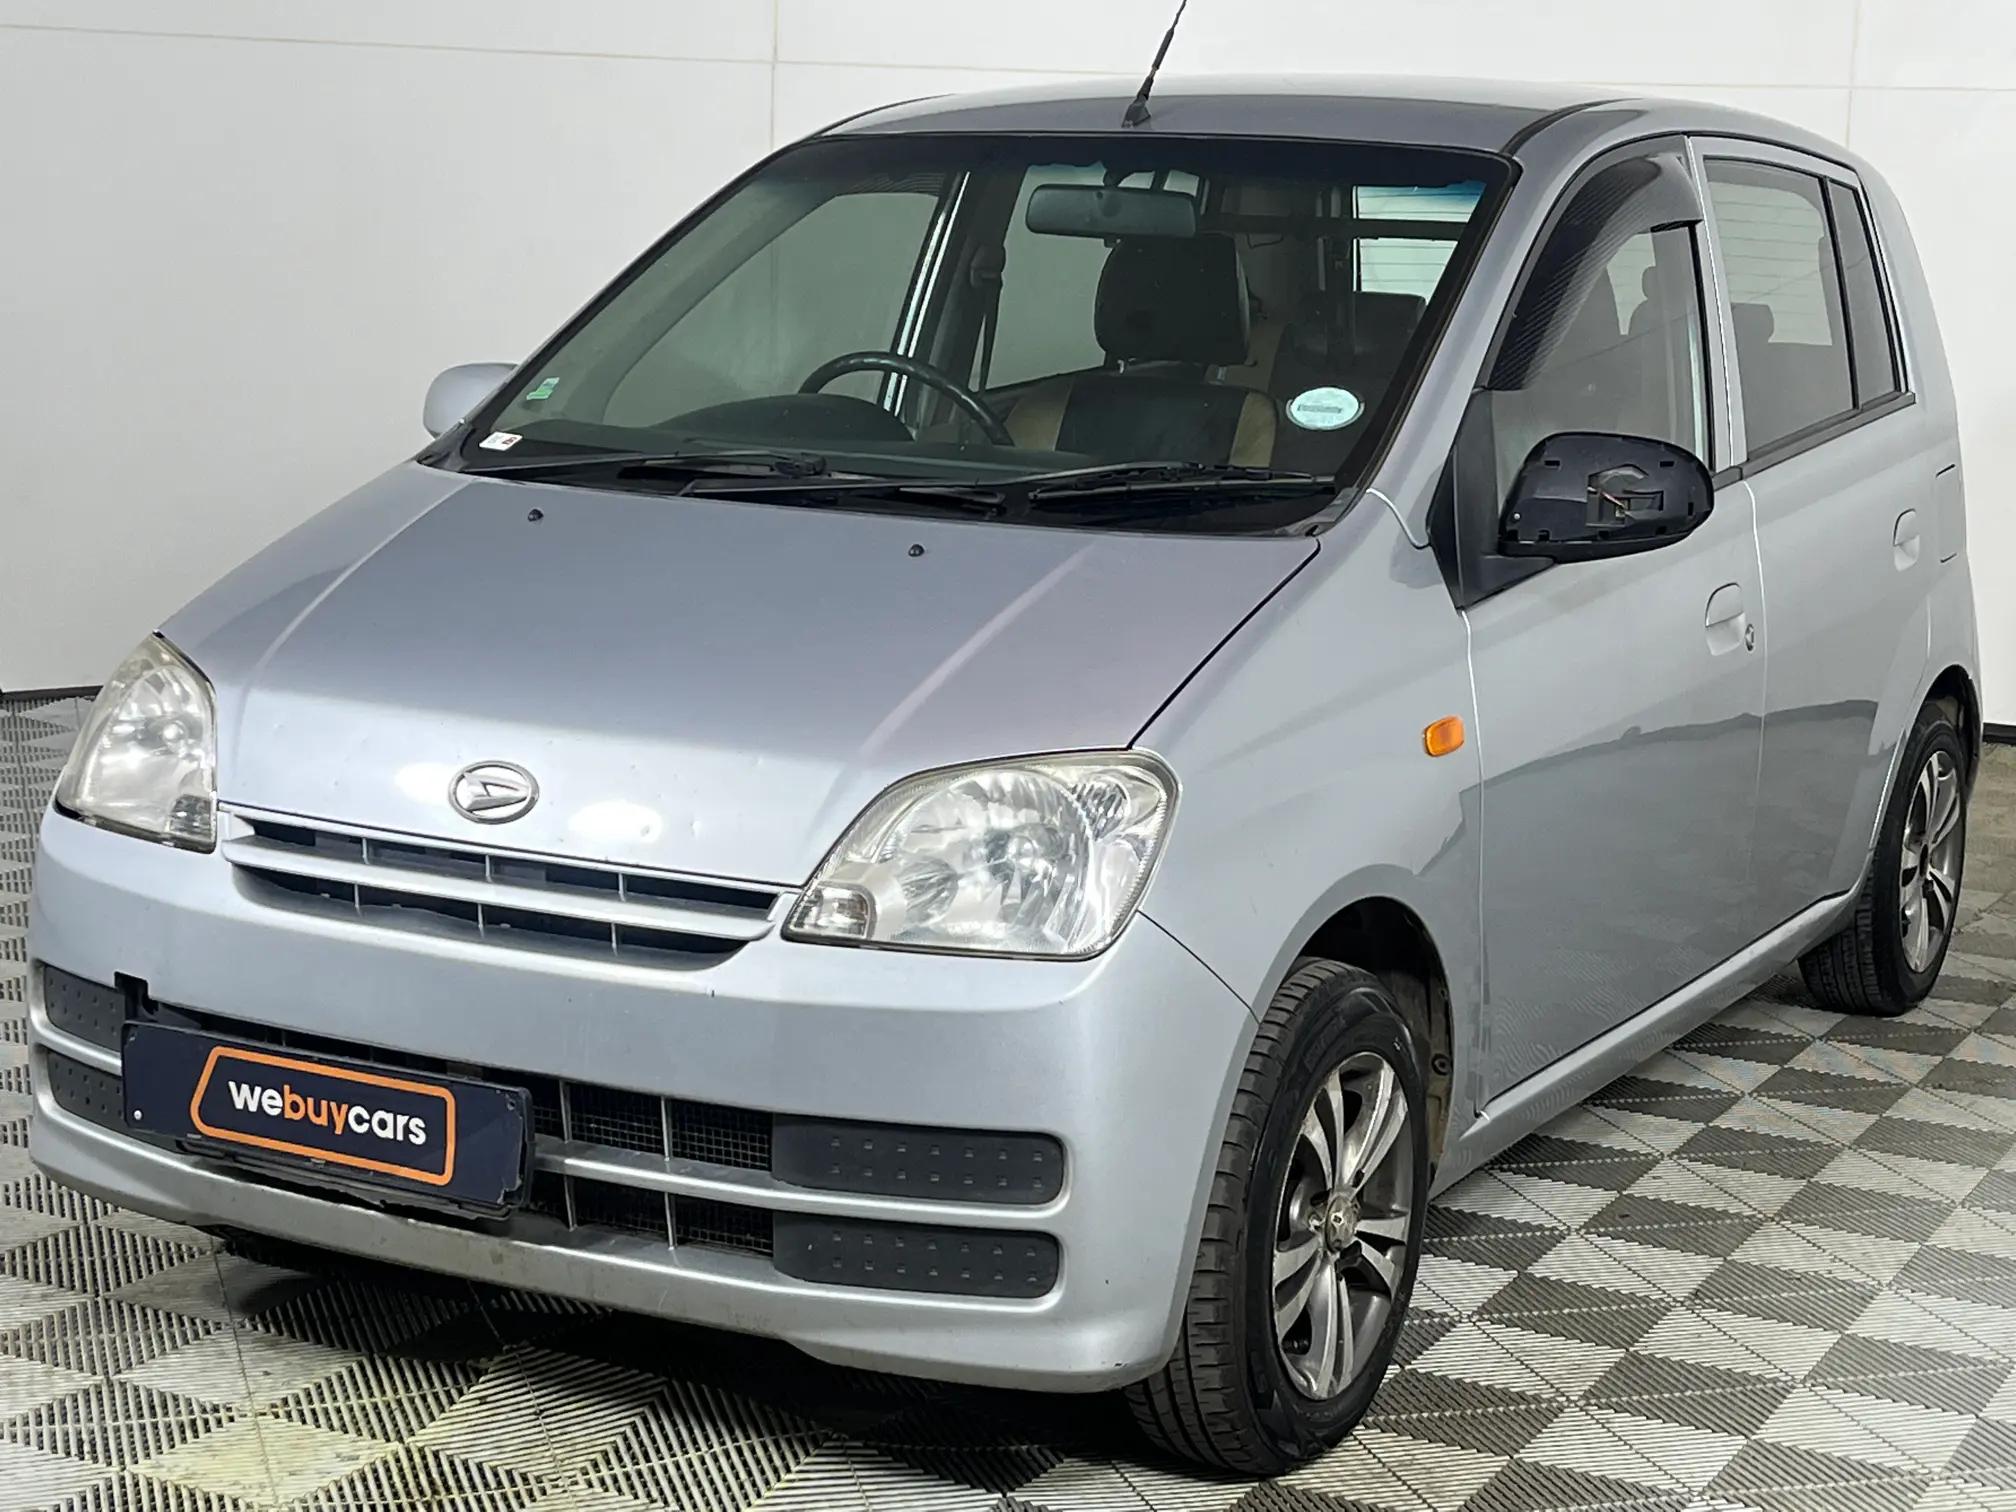 Daihatsu Charade Cars For Sale In South Africa New And Used